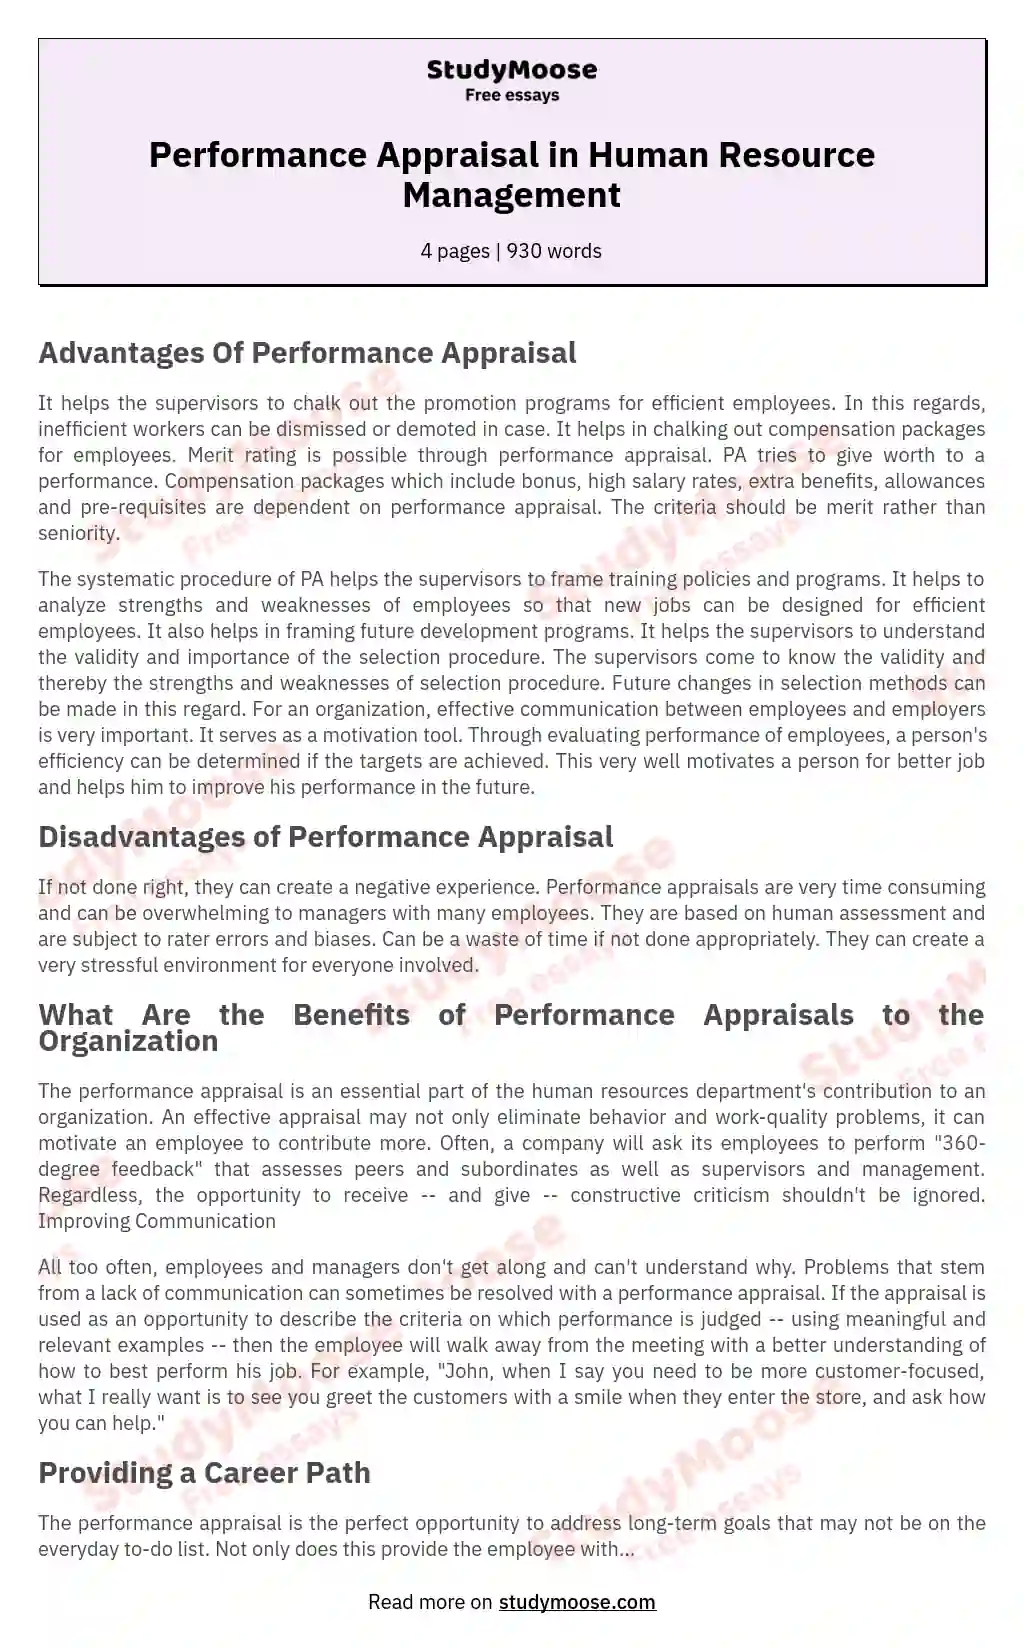 Performance Appraisal in Human Resource Management